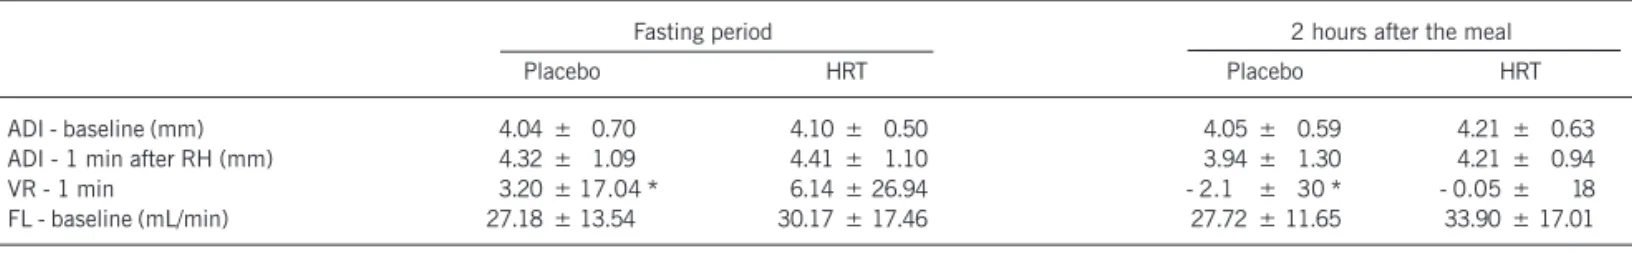 Table II shows the values of the means and standard deviations of the variables analyzed with the use of placebo or hormone replacement therapy in the different phases of the study